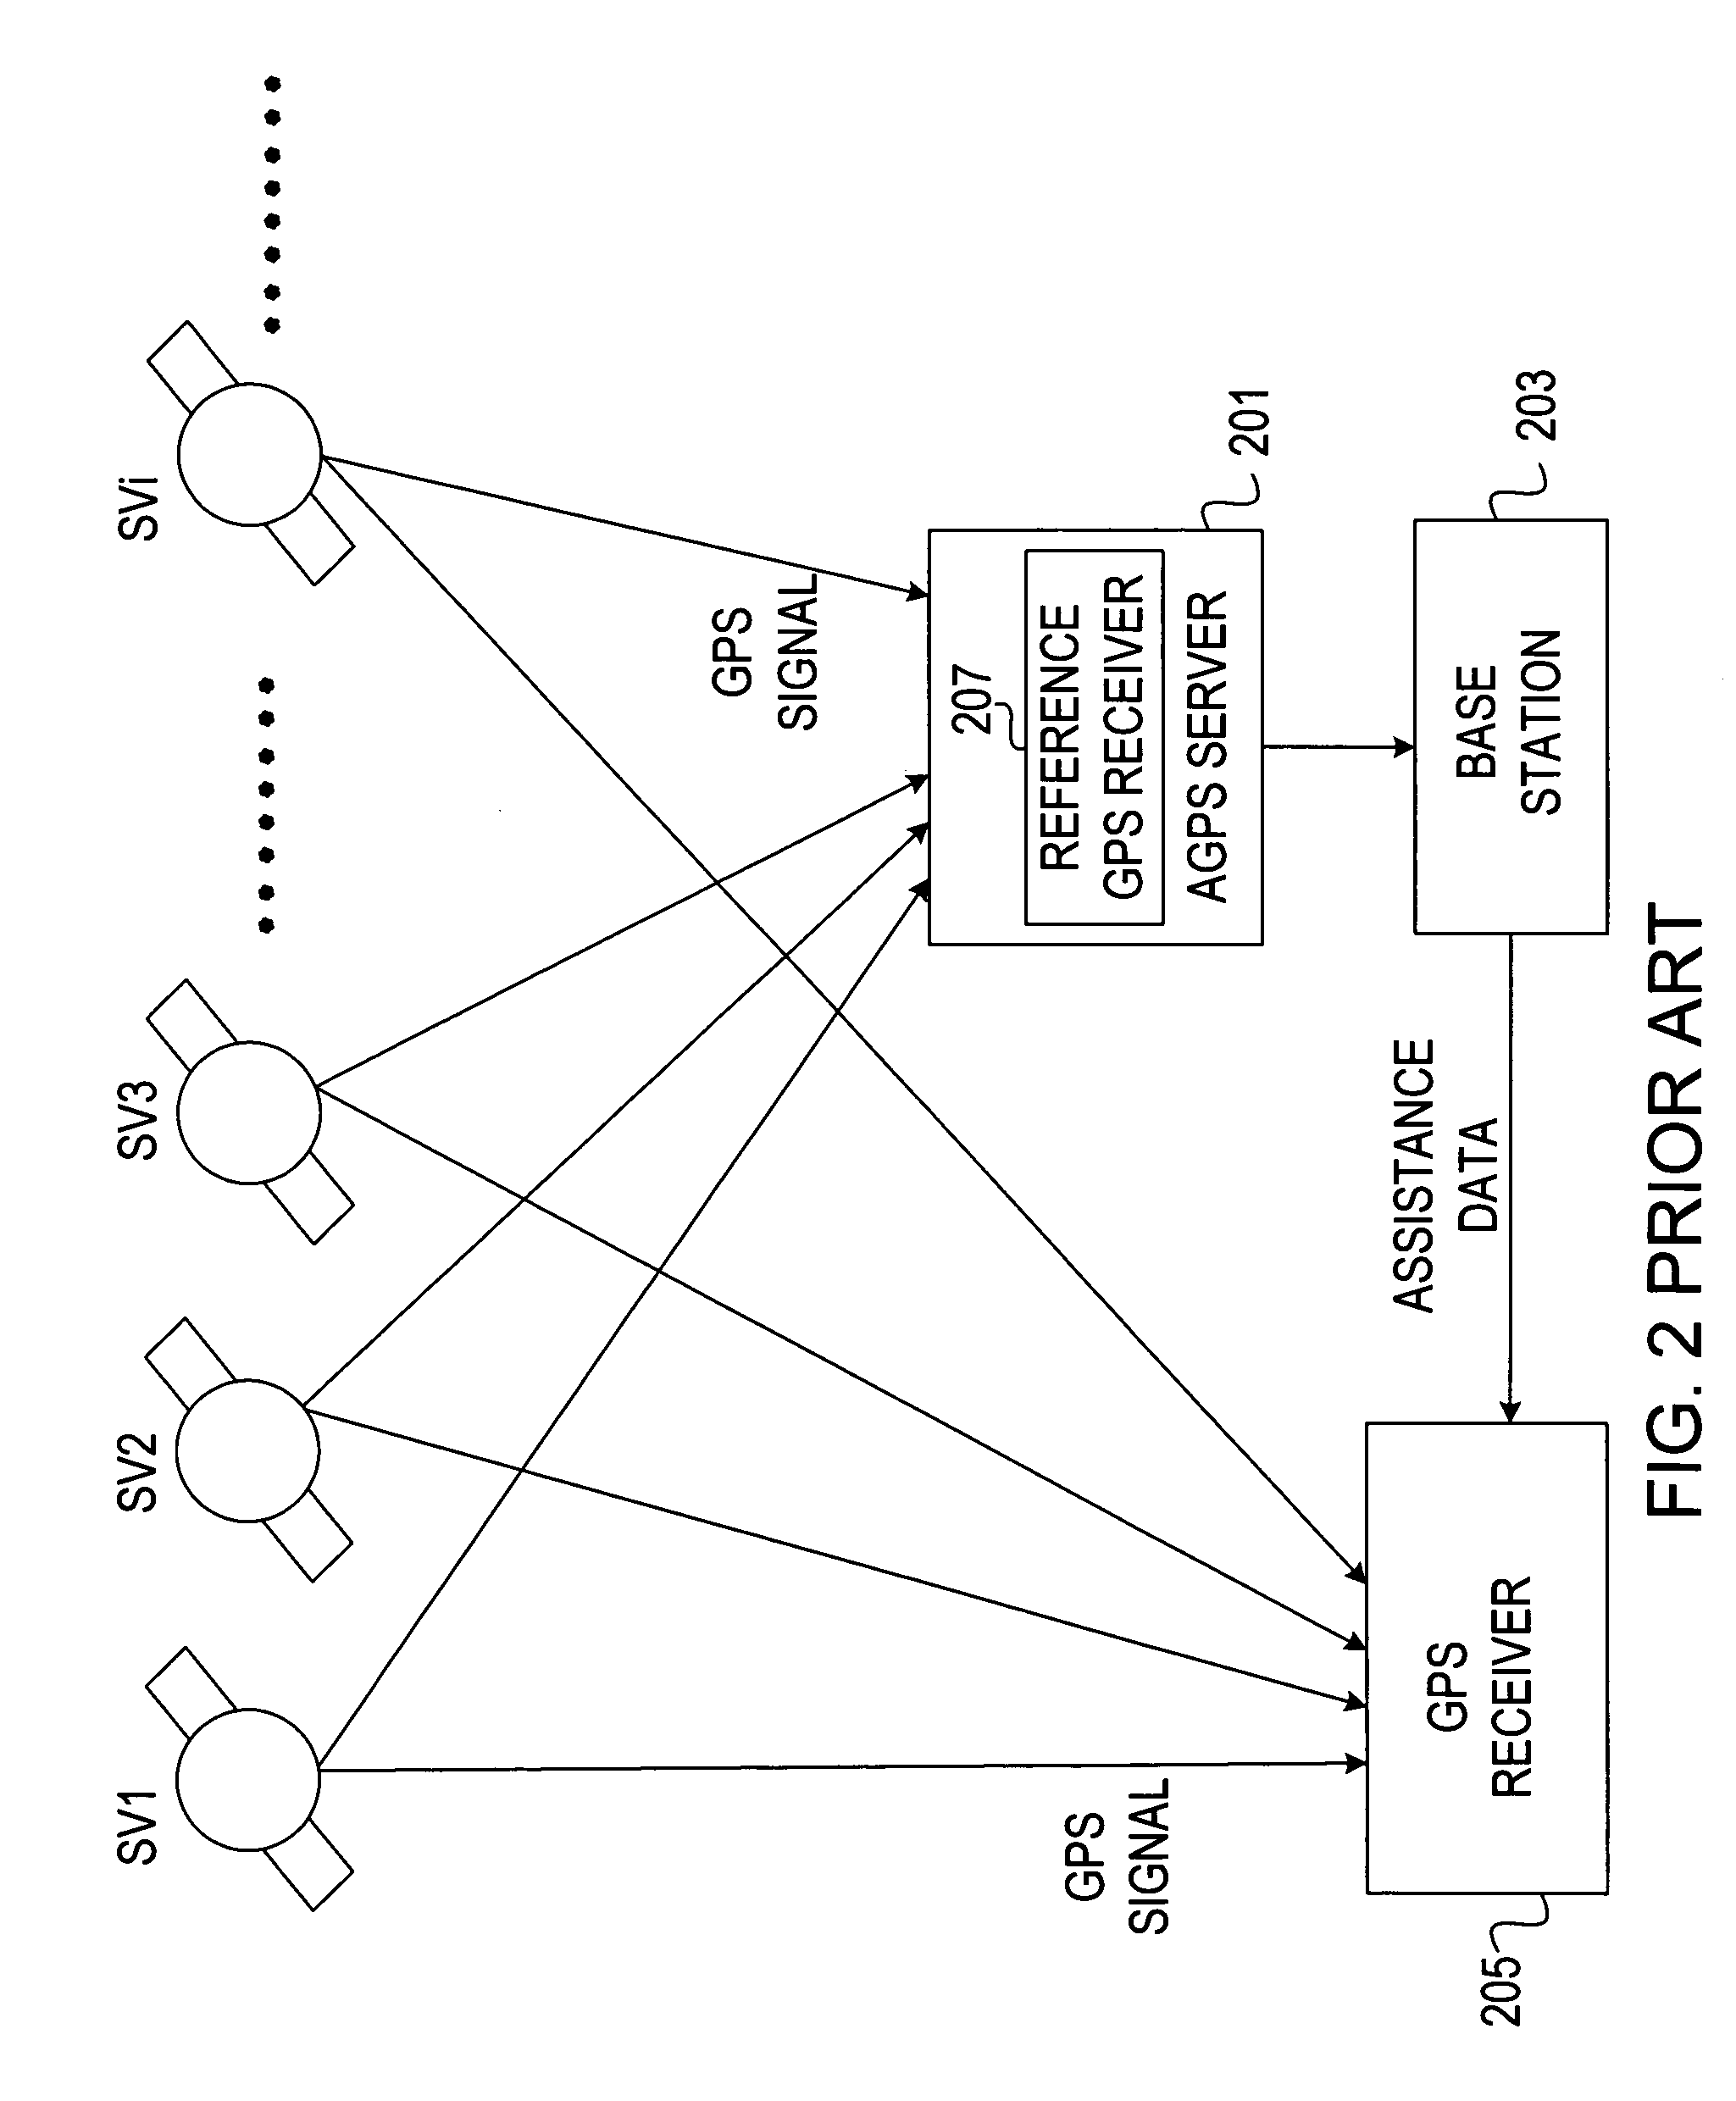 Method for GPS positioning in a weak signal environment